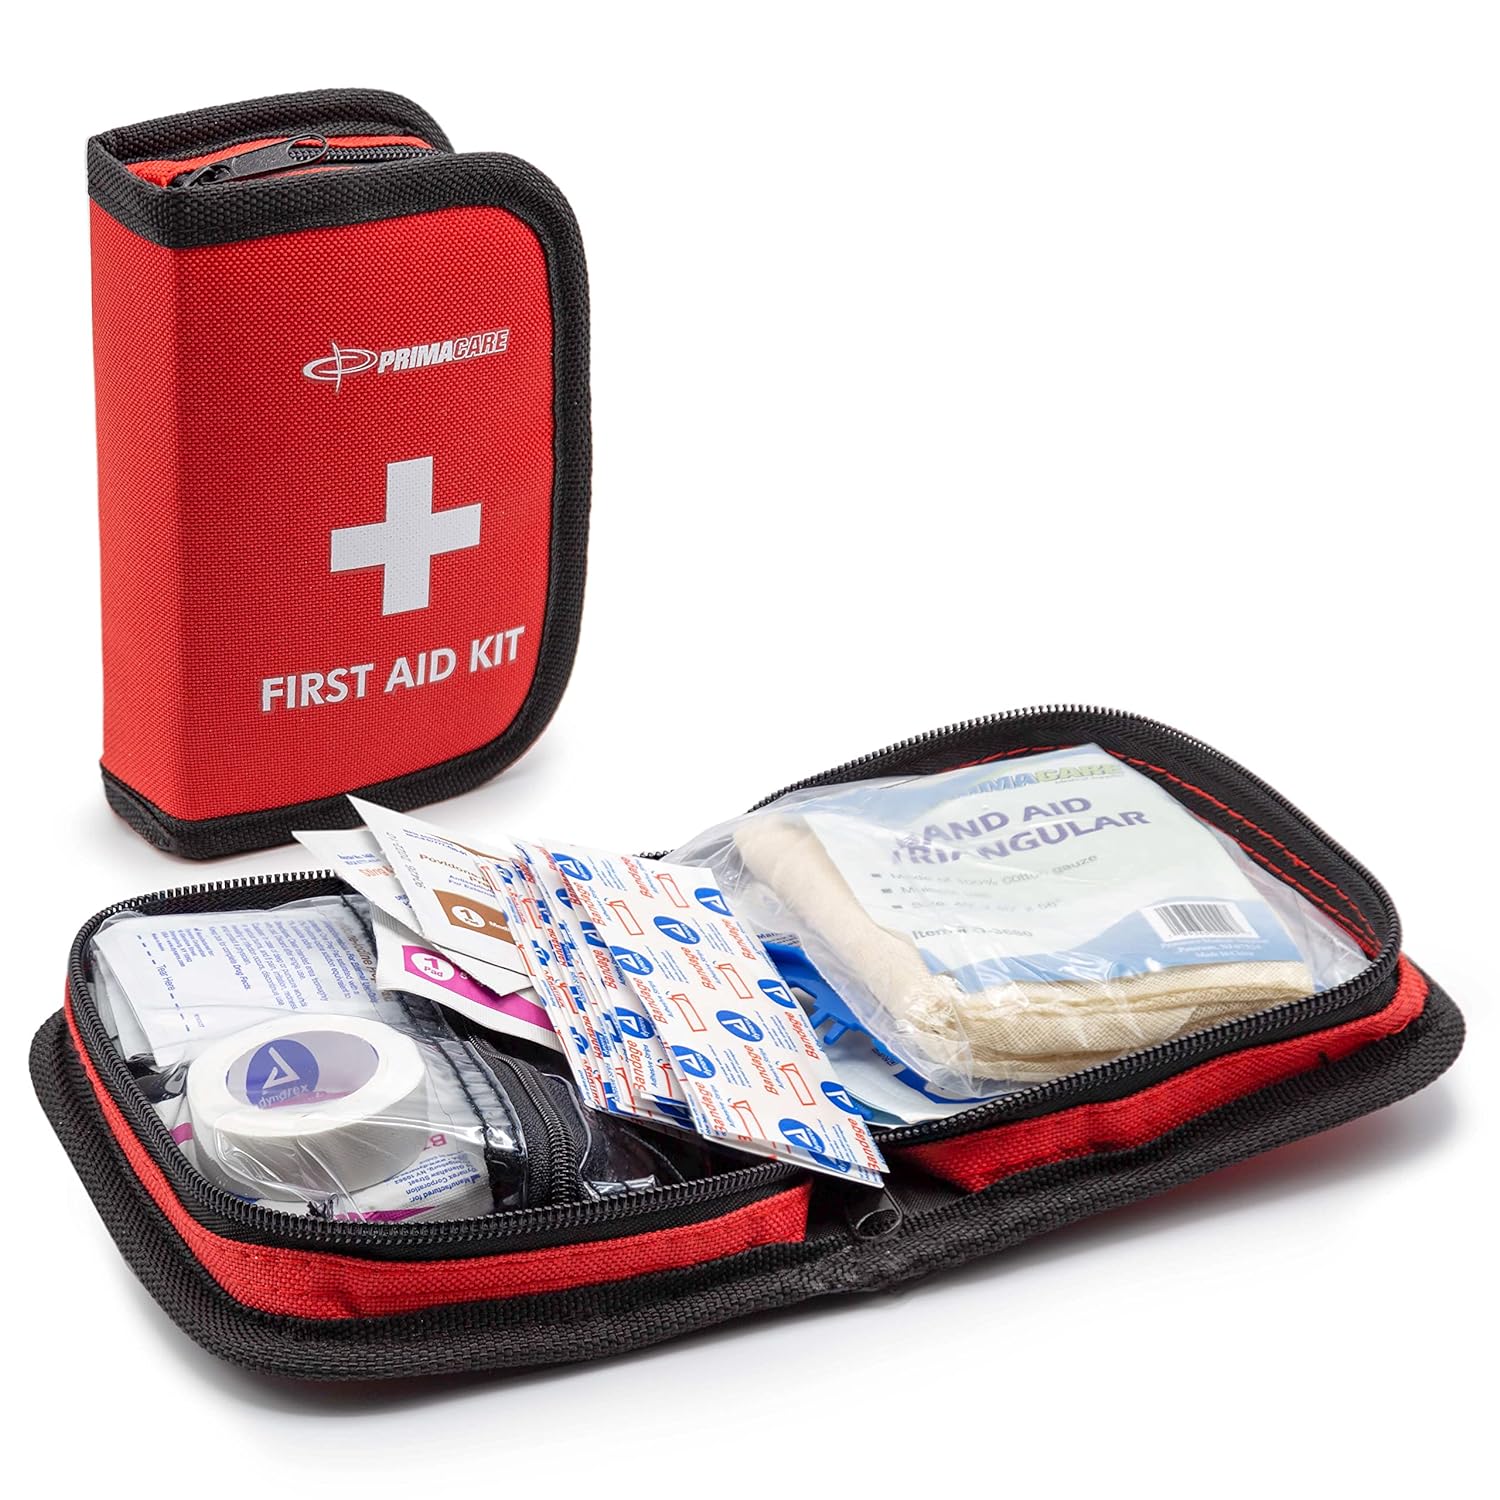 Primacare KB-7411 First Aid Kit Review